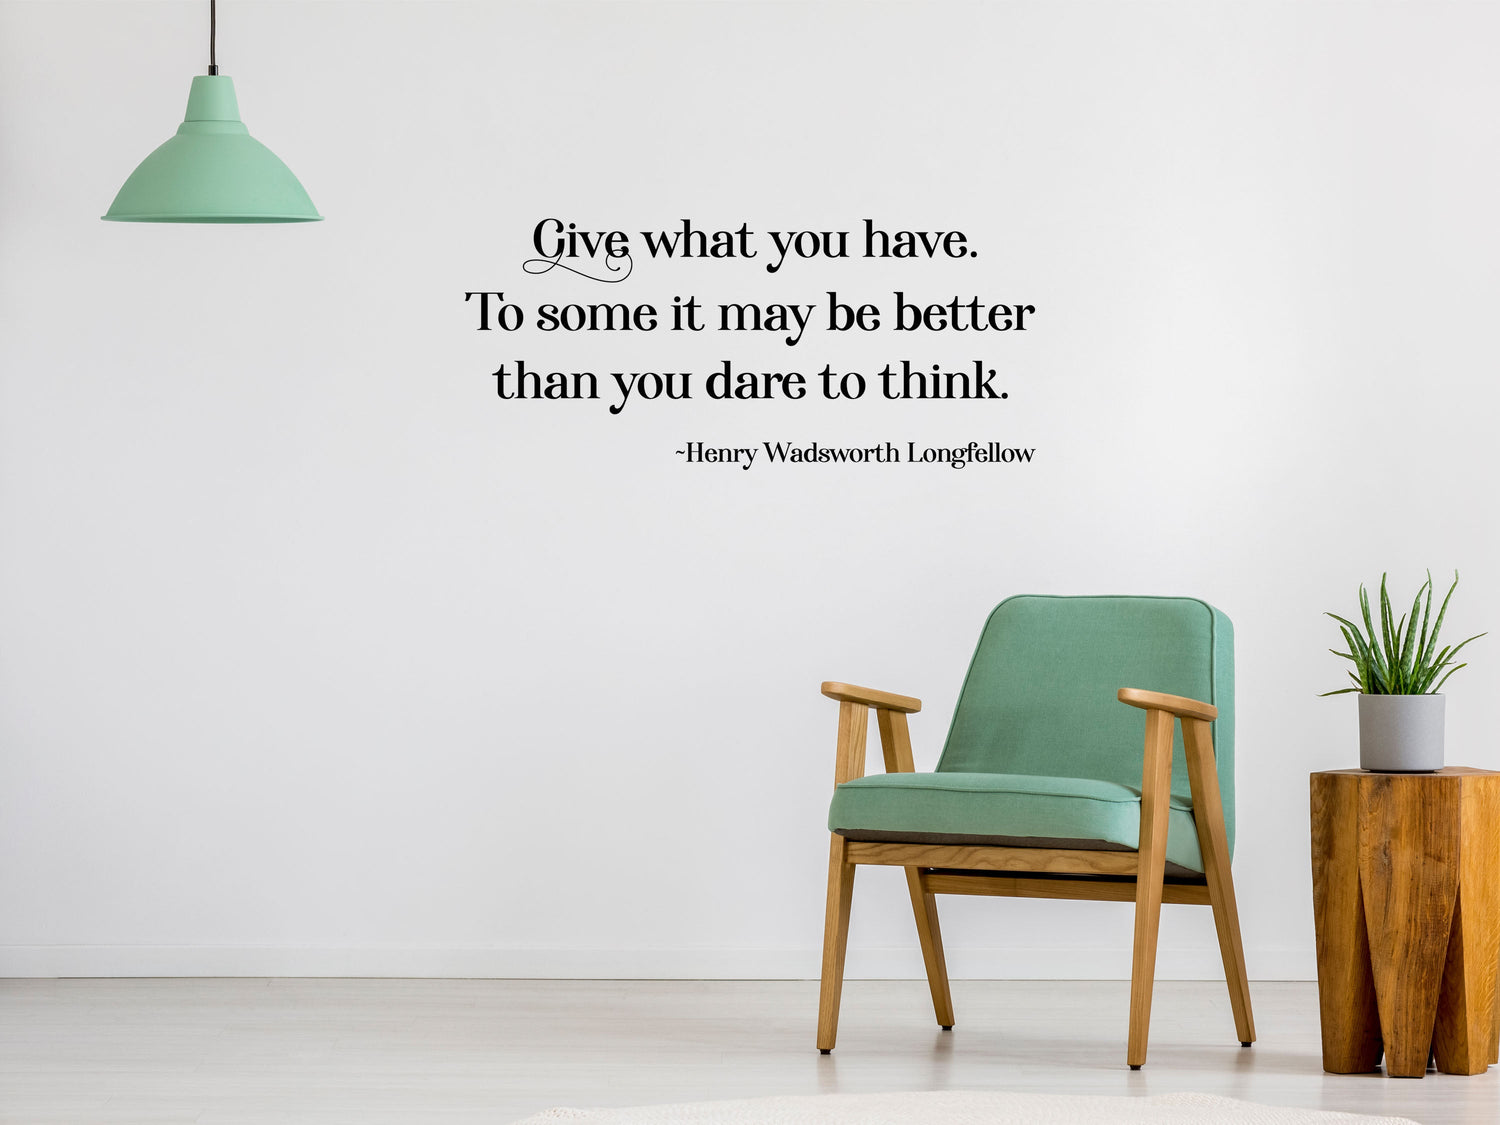 Give What You Have - Inspirational Wall Decals Vinyl Wall Decal Inspirational Wall Signs 